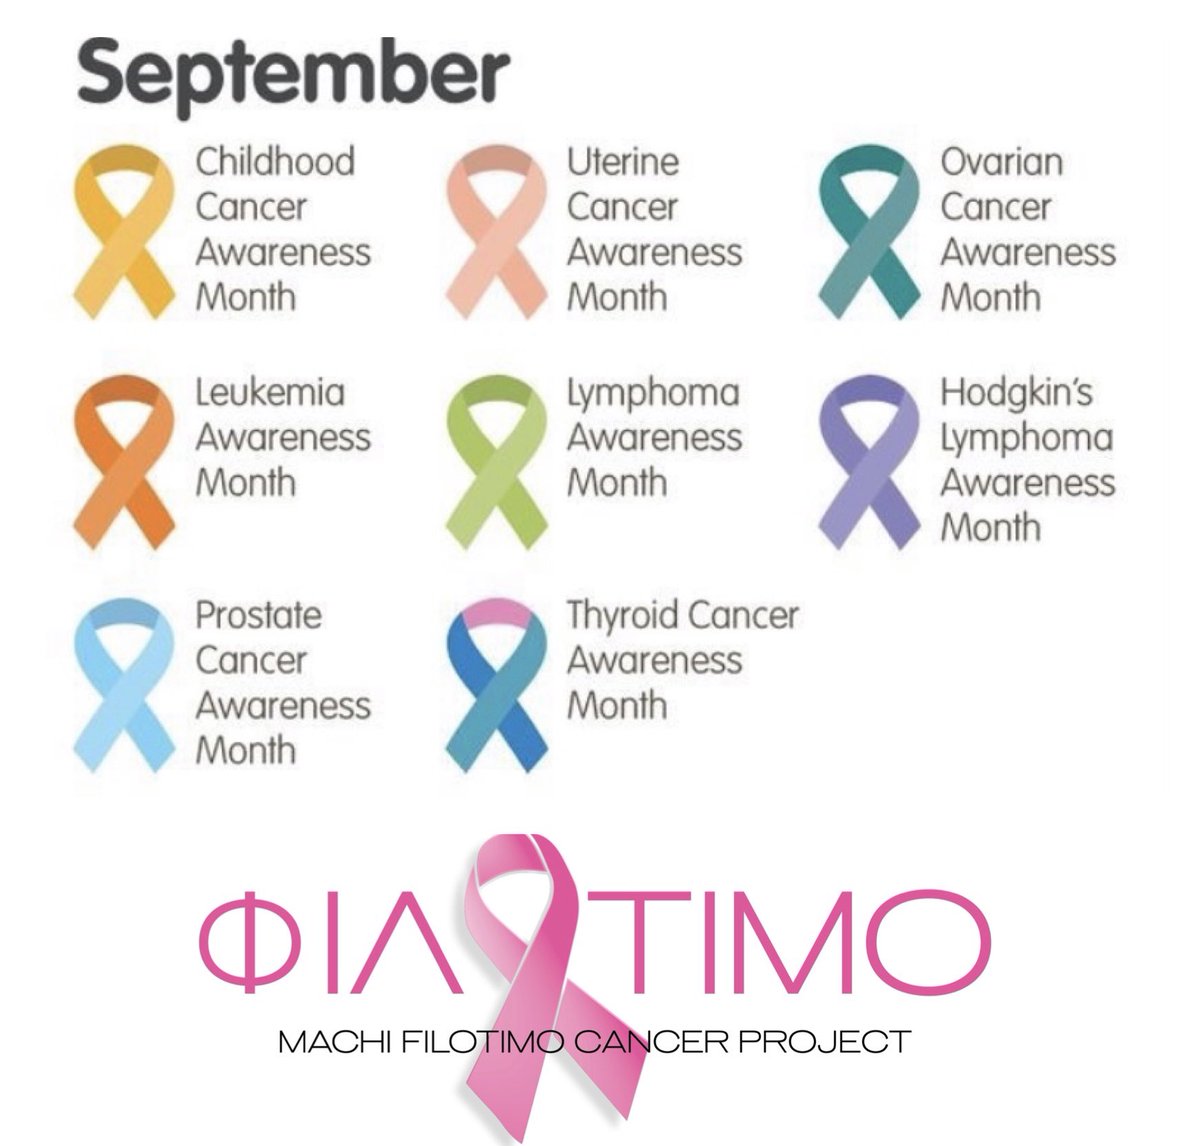 September Cancer Awareness month🎗
#childhoodcancer #uterinecancer #ovariancancer #leukemiaawareness #lymphomaawareness #hodgkinslymphoma #prostatecancer #thyriodcancer 
Our purpose is to create awareness about #Cancer and to educate on early detection🎗
Filotimo.org.za